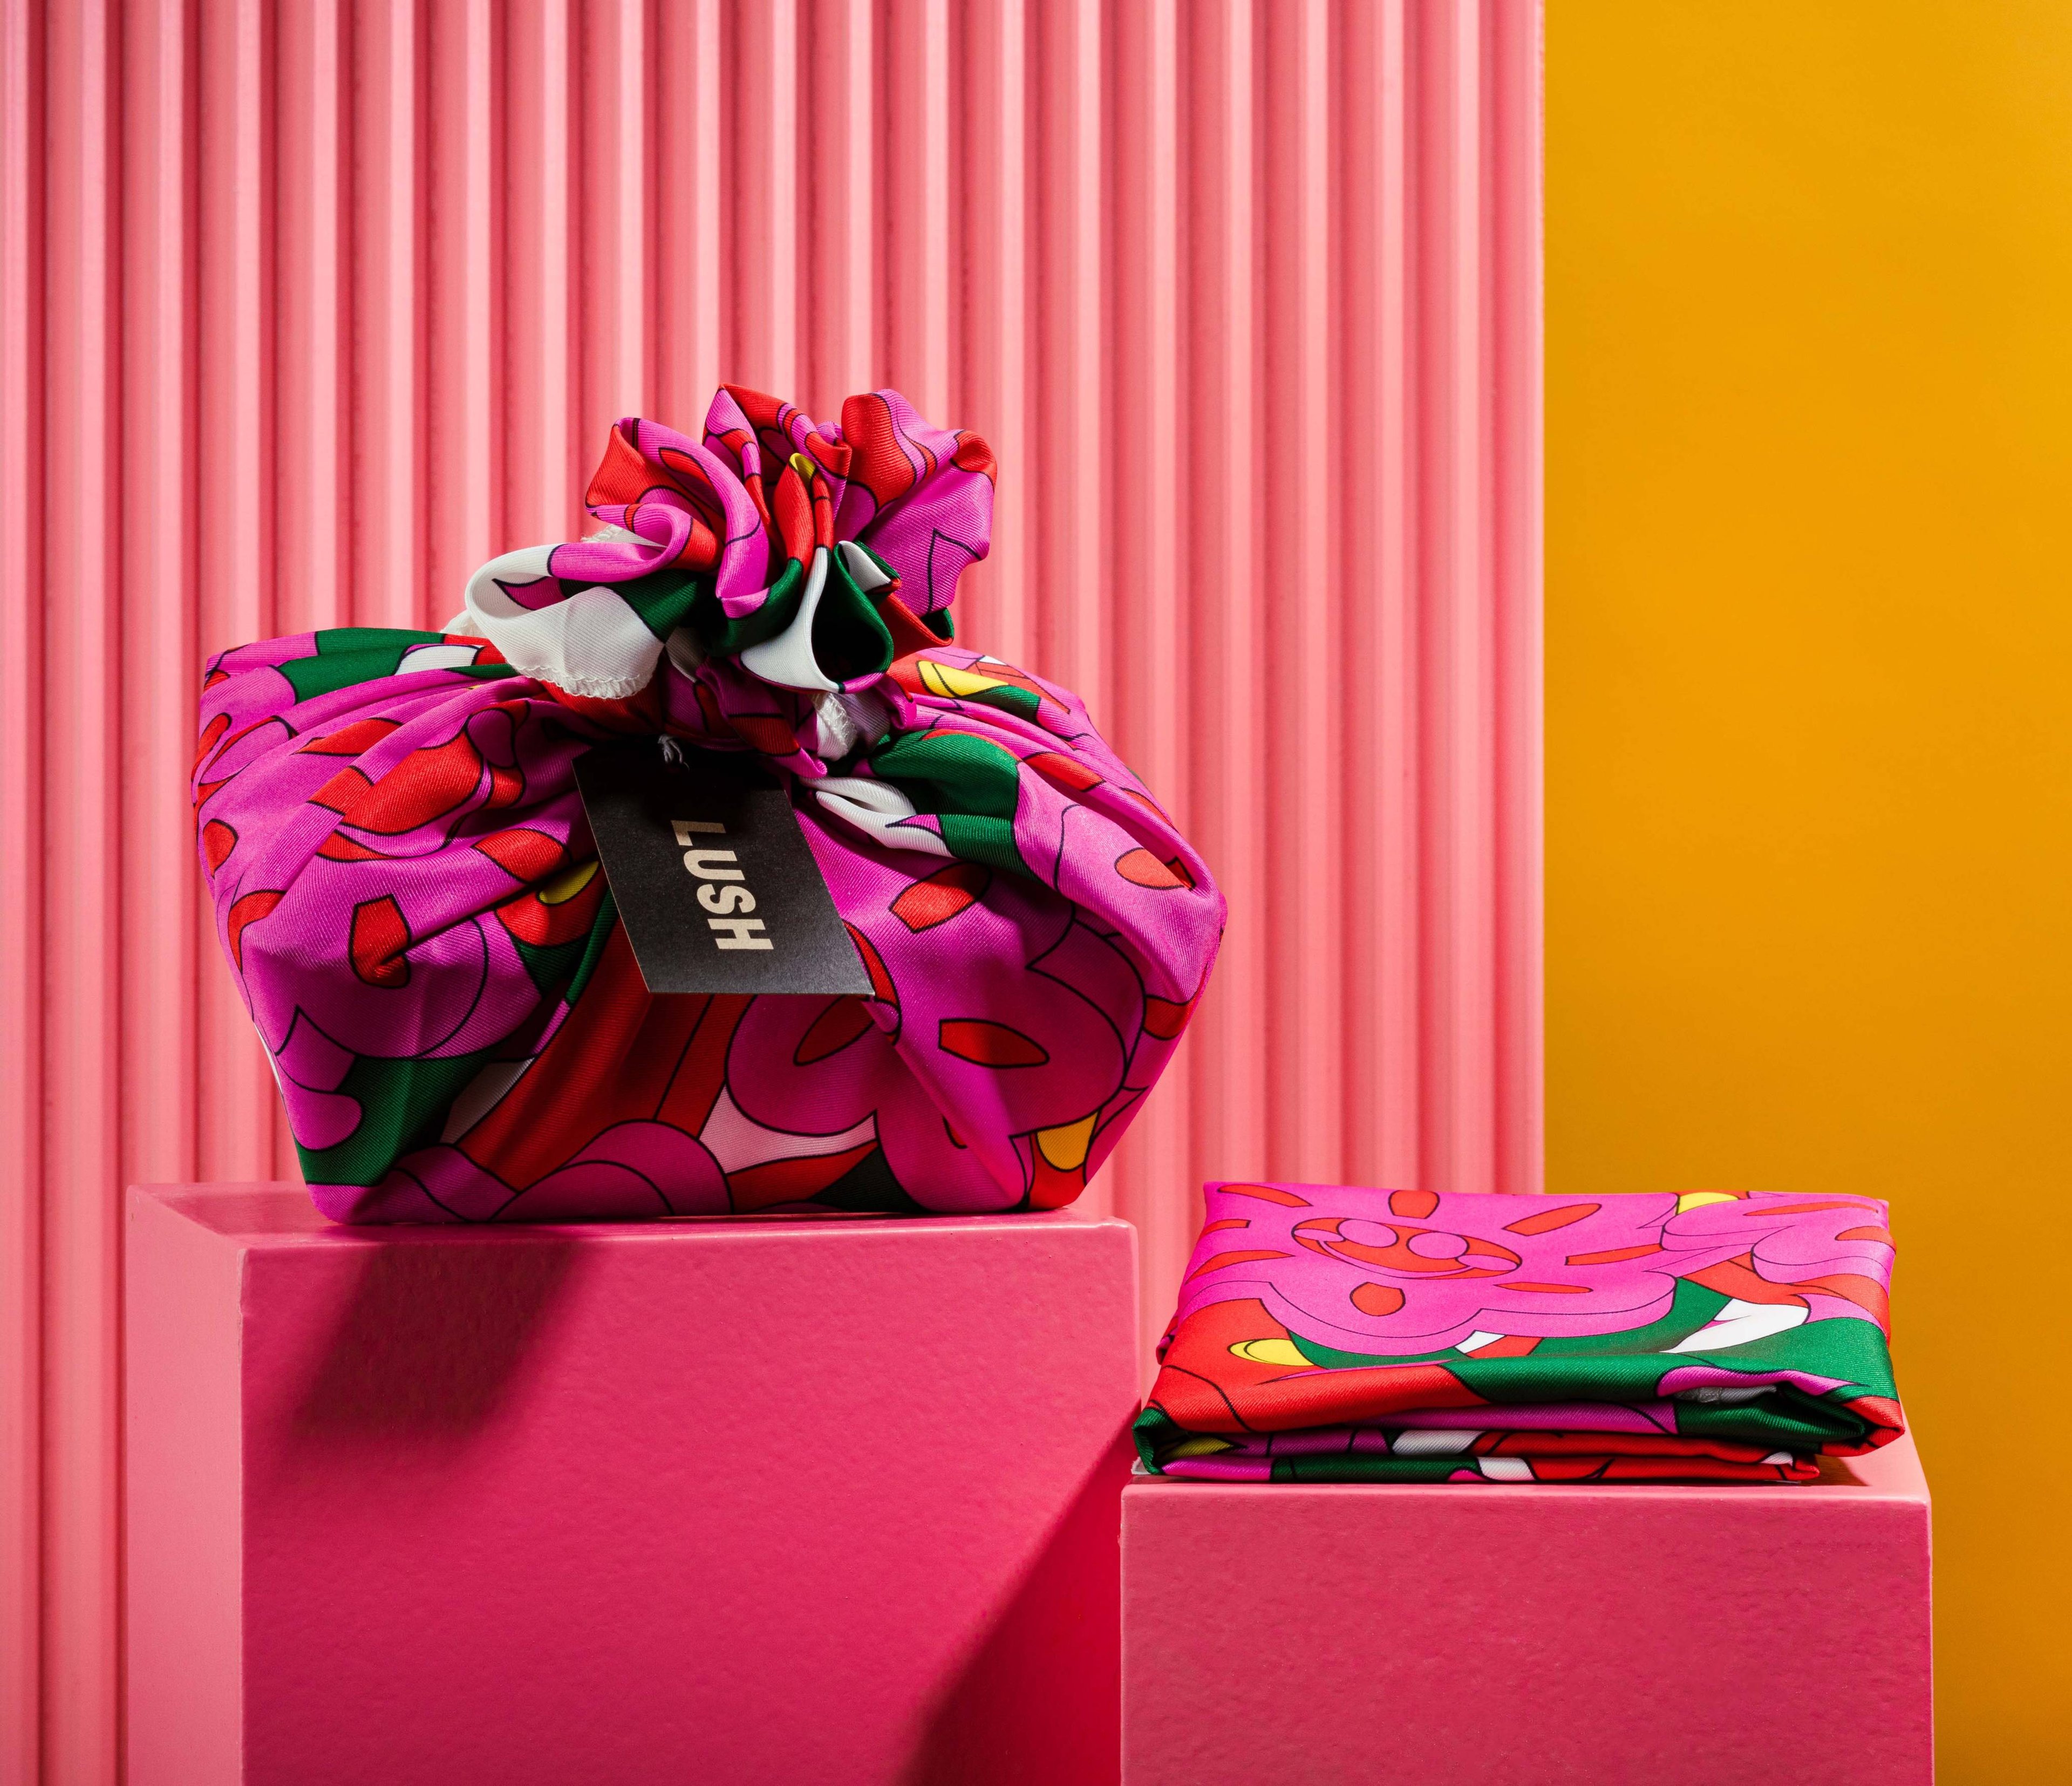 The Knot Wrap is decoratively wrapped with a Lush gift tag, alongside one folded, in front of a pink and yellow background. 